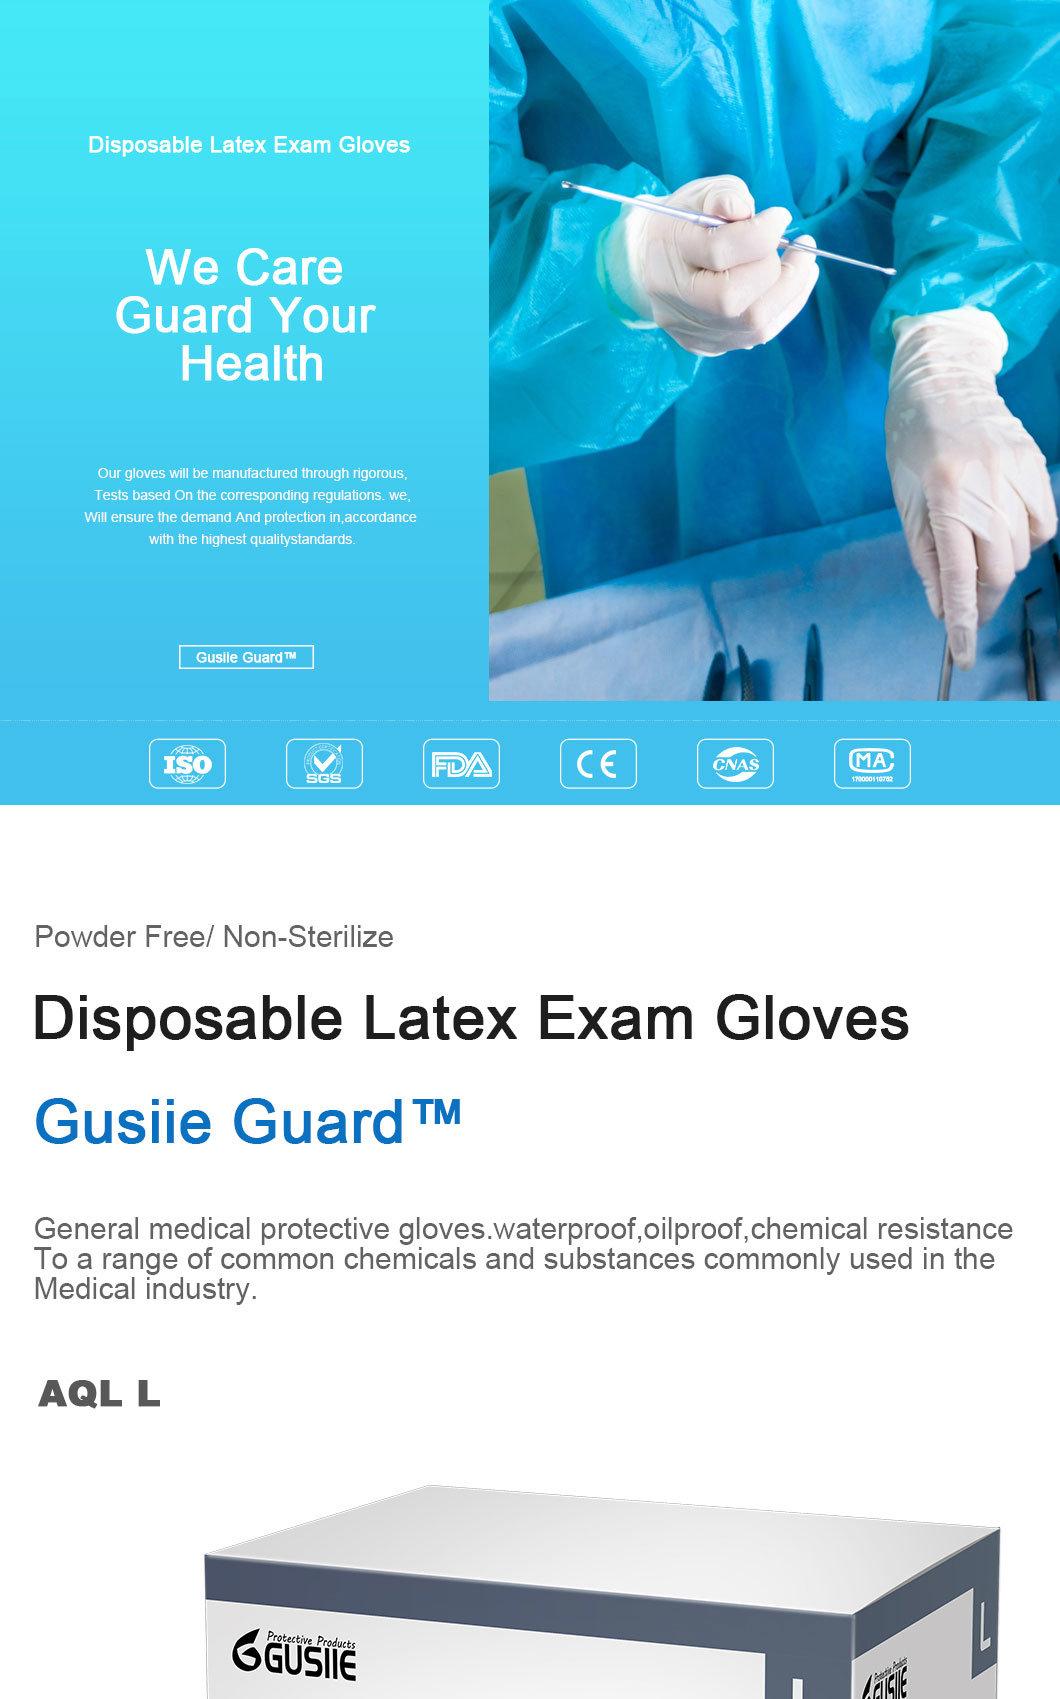 Medical Gloves Disposable Latex Examination Gloves Powder Free and Powdered Natural Rubber